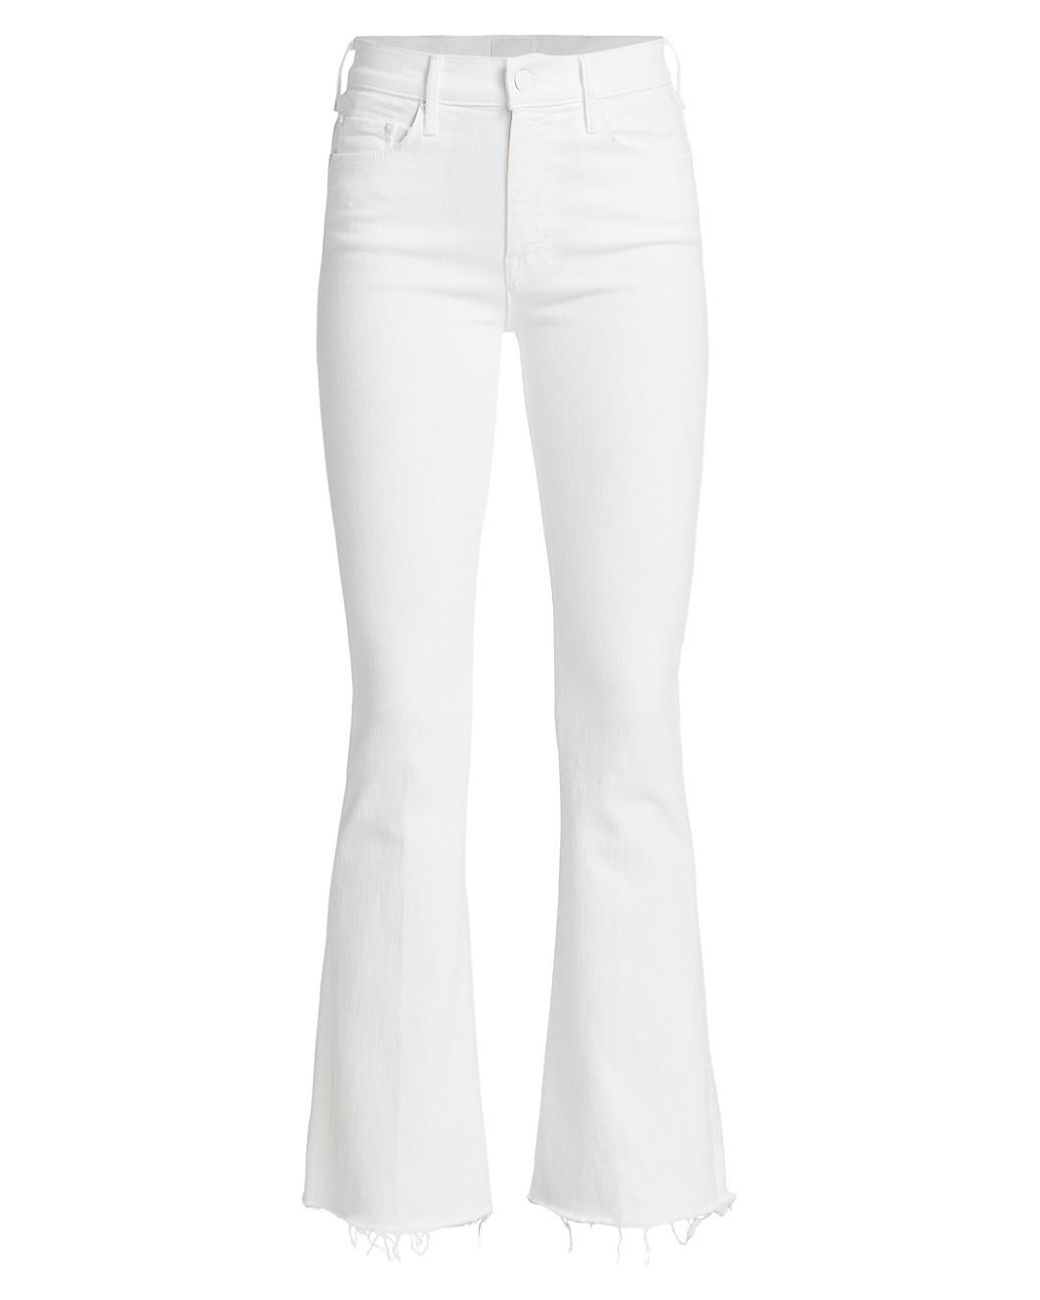 Mother Denim The Weekender Mid-rise Flare Fray Hem Jeans in White - Lyst